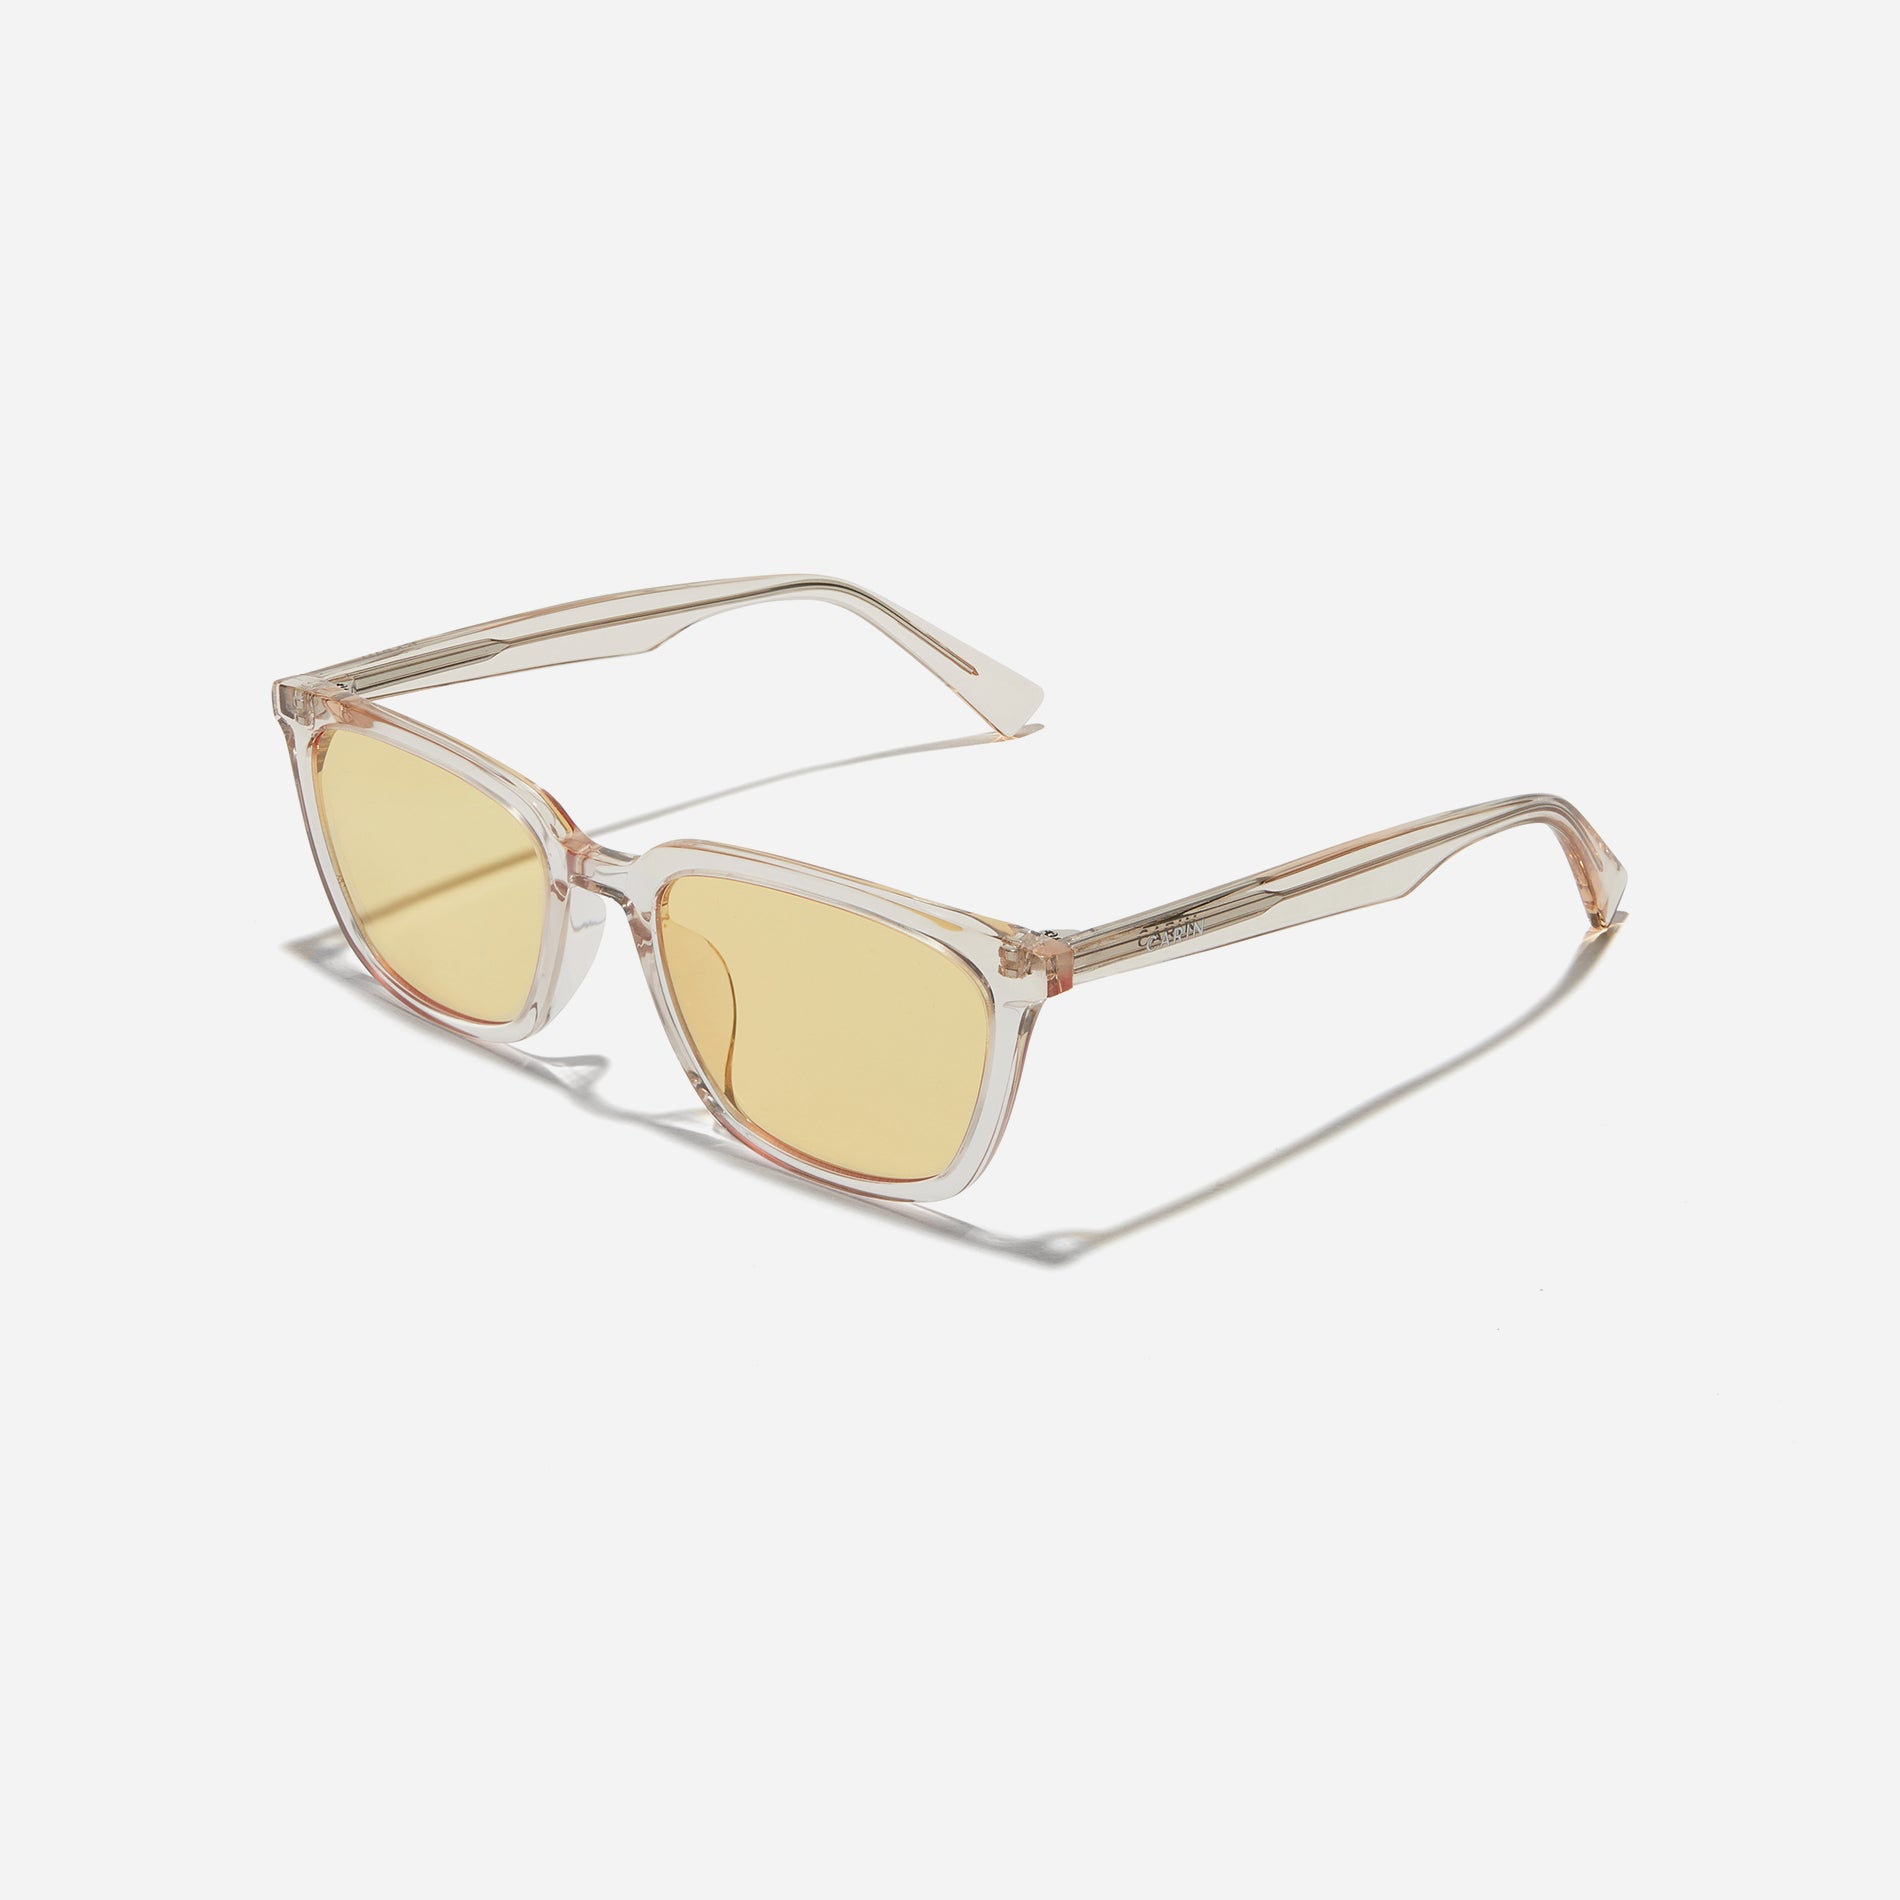 Square-shaped petite frame sunglasses with retro-inspired design that exudes chic and contemporary vibe. 